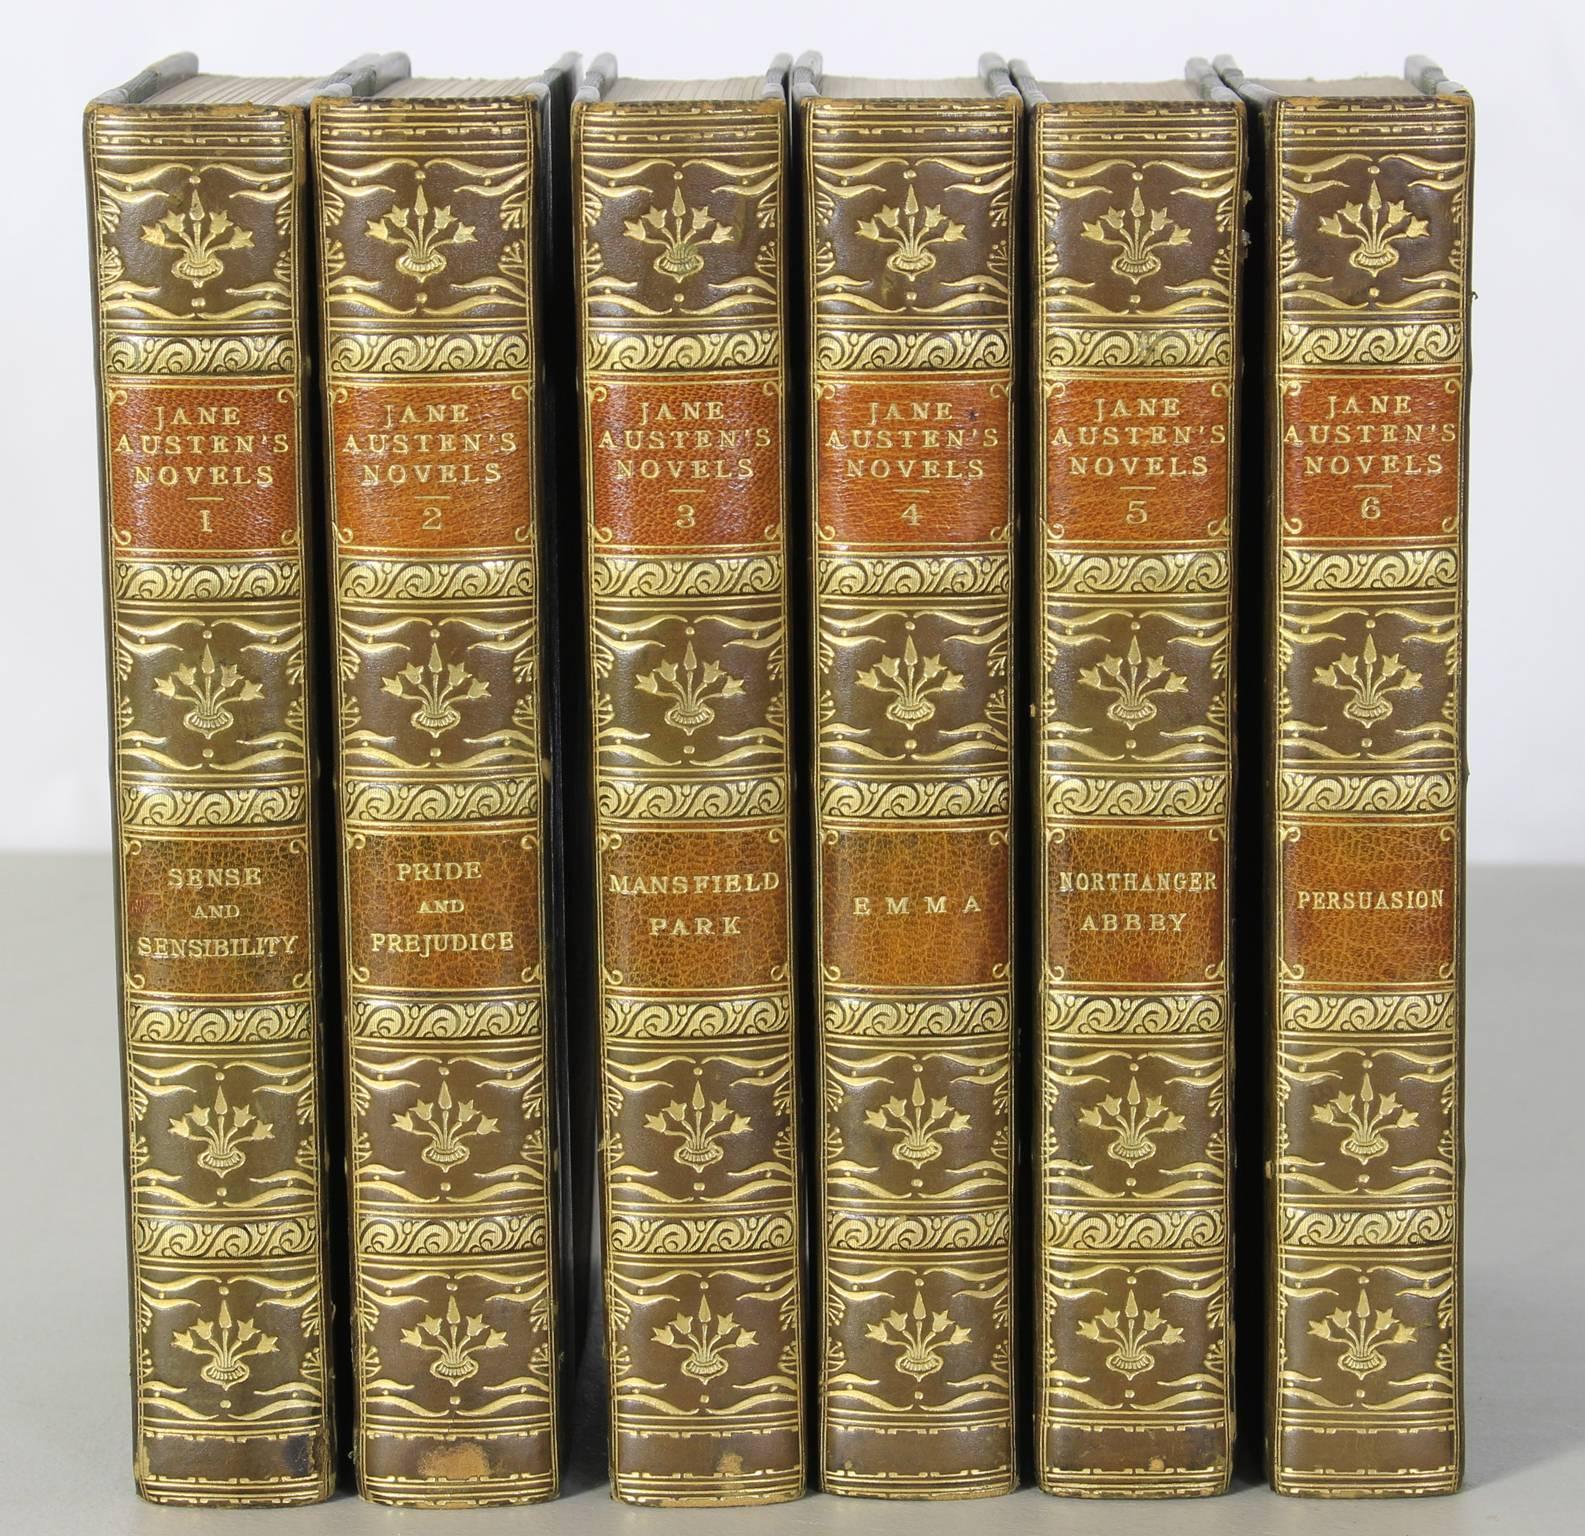 Early 20th Century Handsome Collection of Jane Austen's Novels